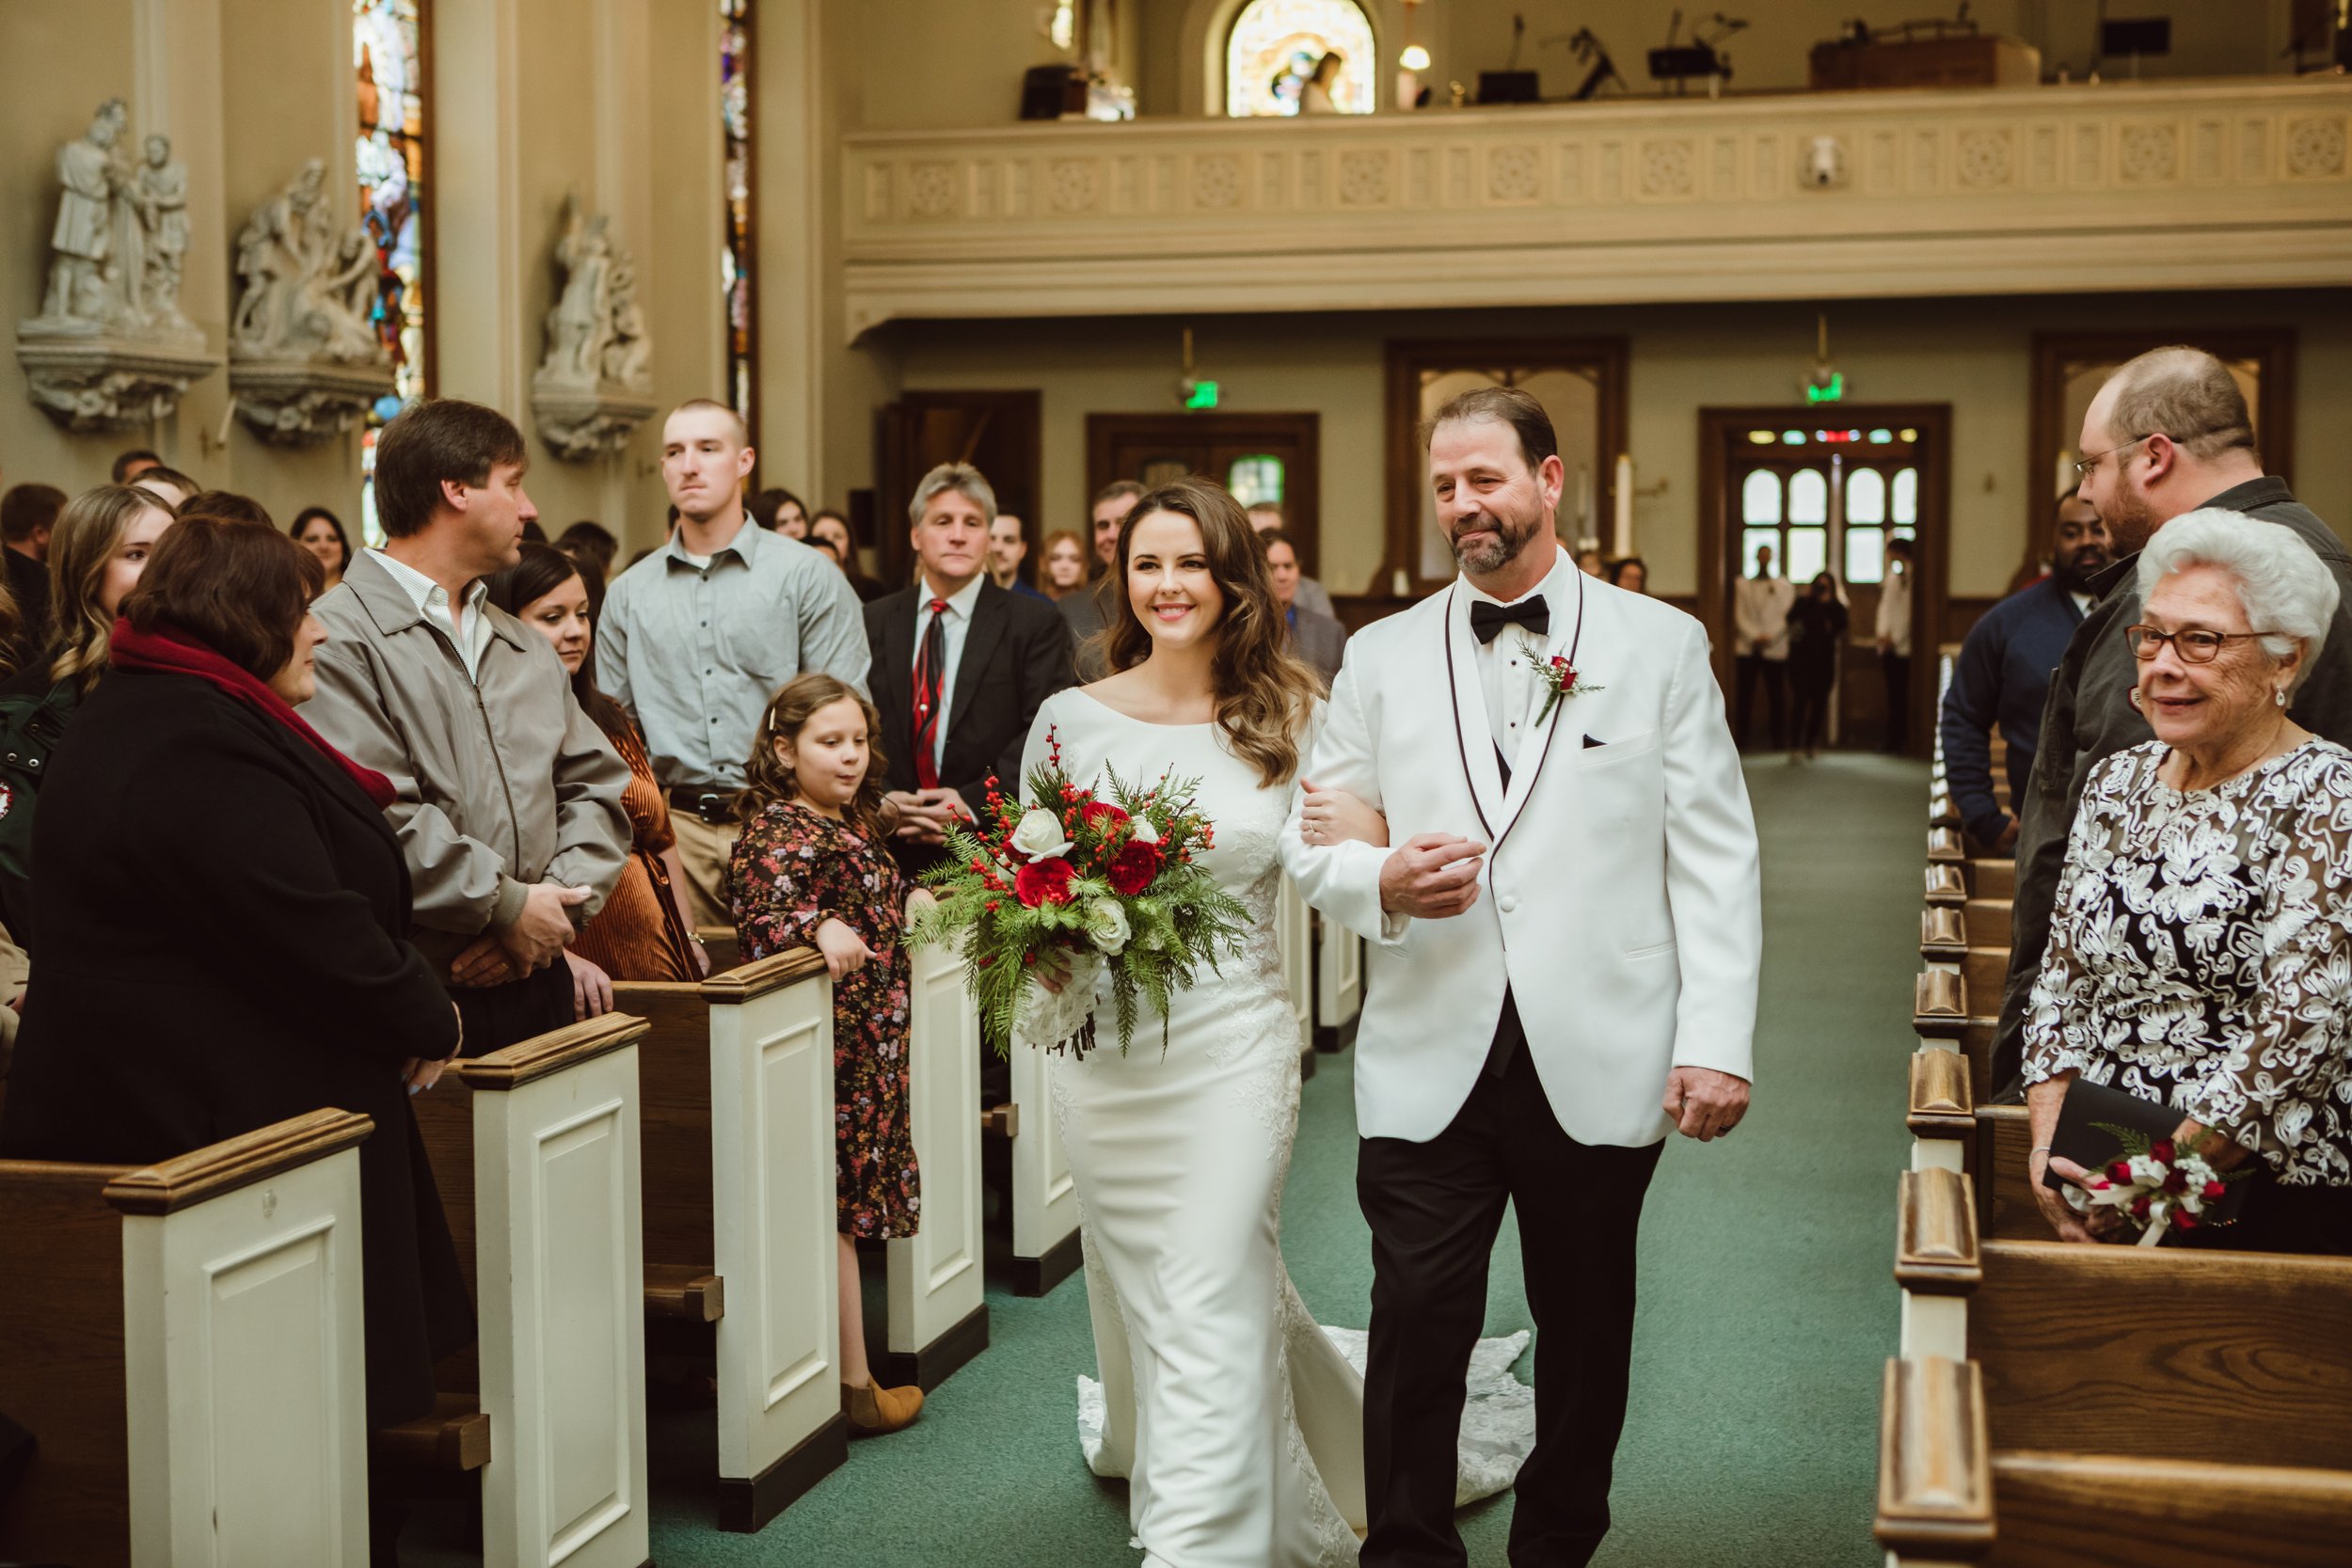  Bride walks down the aisle with her father at a historic building in LaSalle by Teala Ward Photography. walk down the aisle #TealaWardPhotography #TealaWardWeddings #LaSalleWedding #churchwedding #Illinoisweddingphotographer #LaSalle,IL 